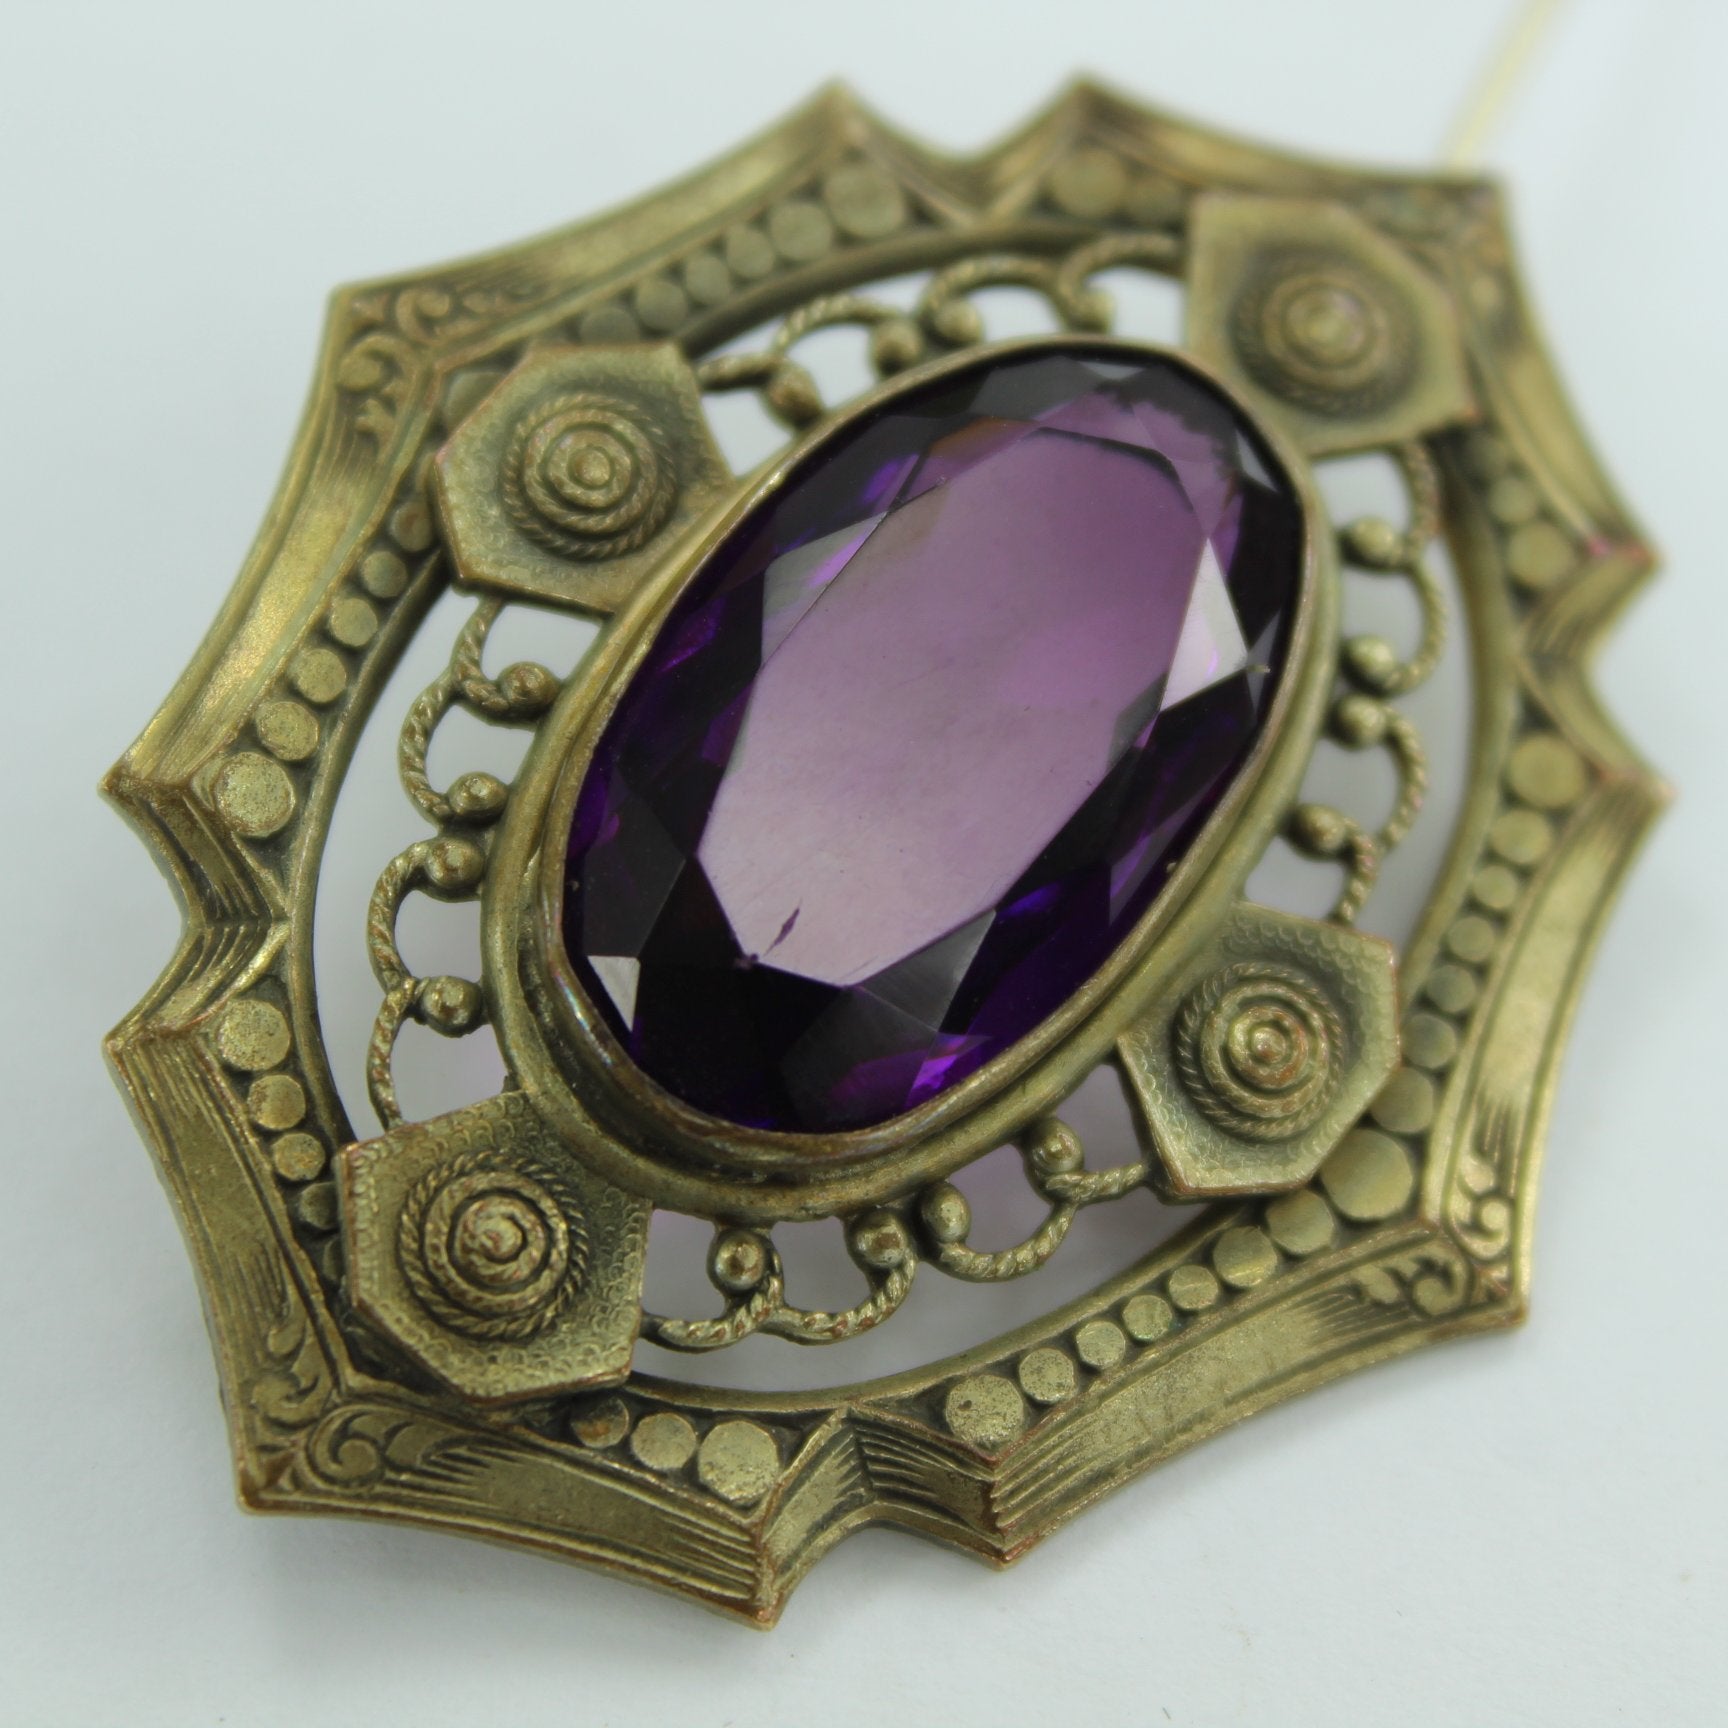 Old Faceted Amethyst Pin Intricate Surround C Closure closeup showing flaw scratch on amethyst